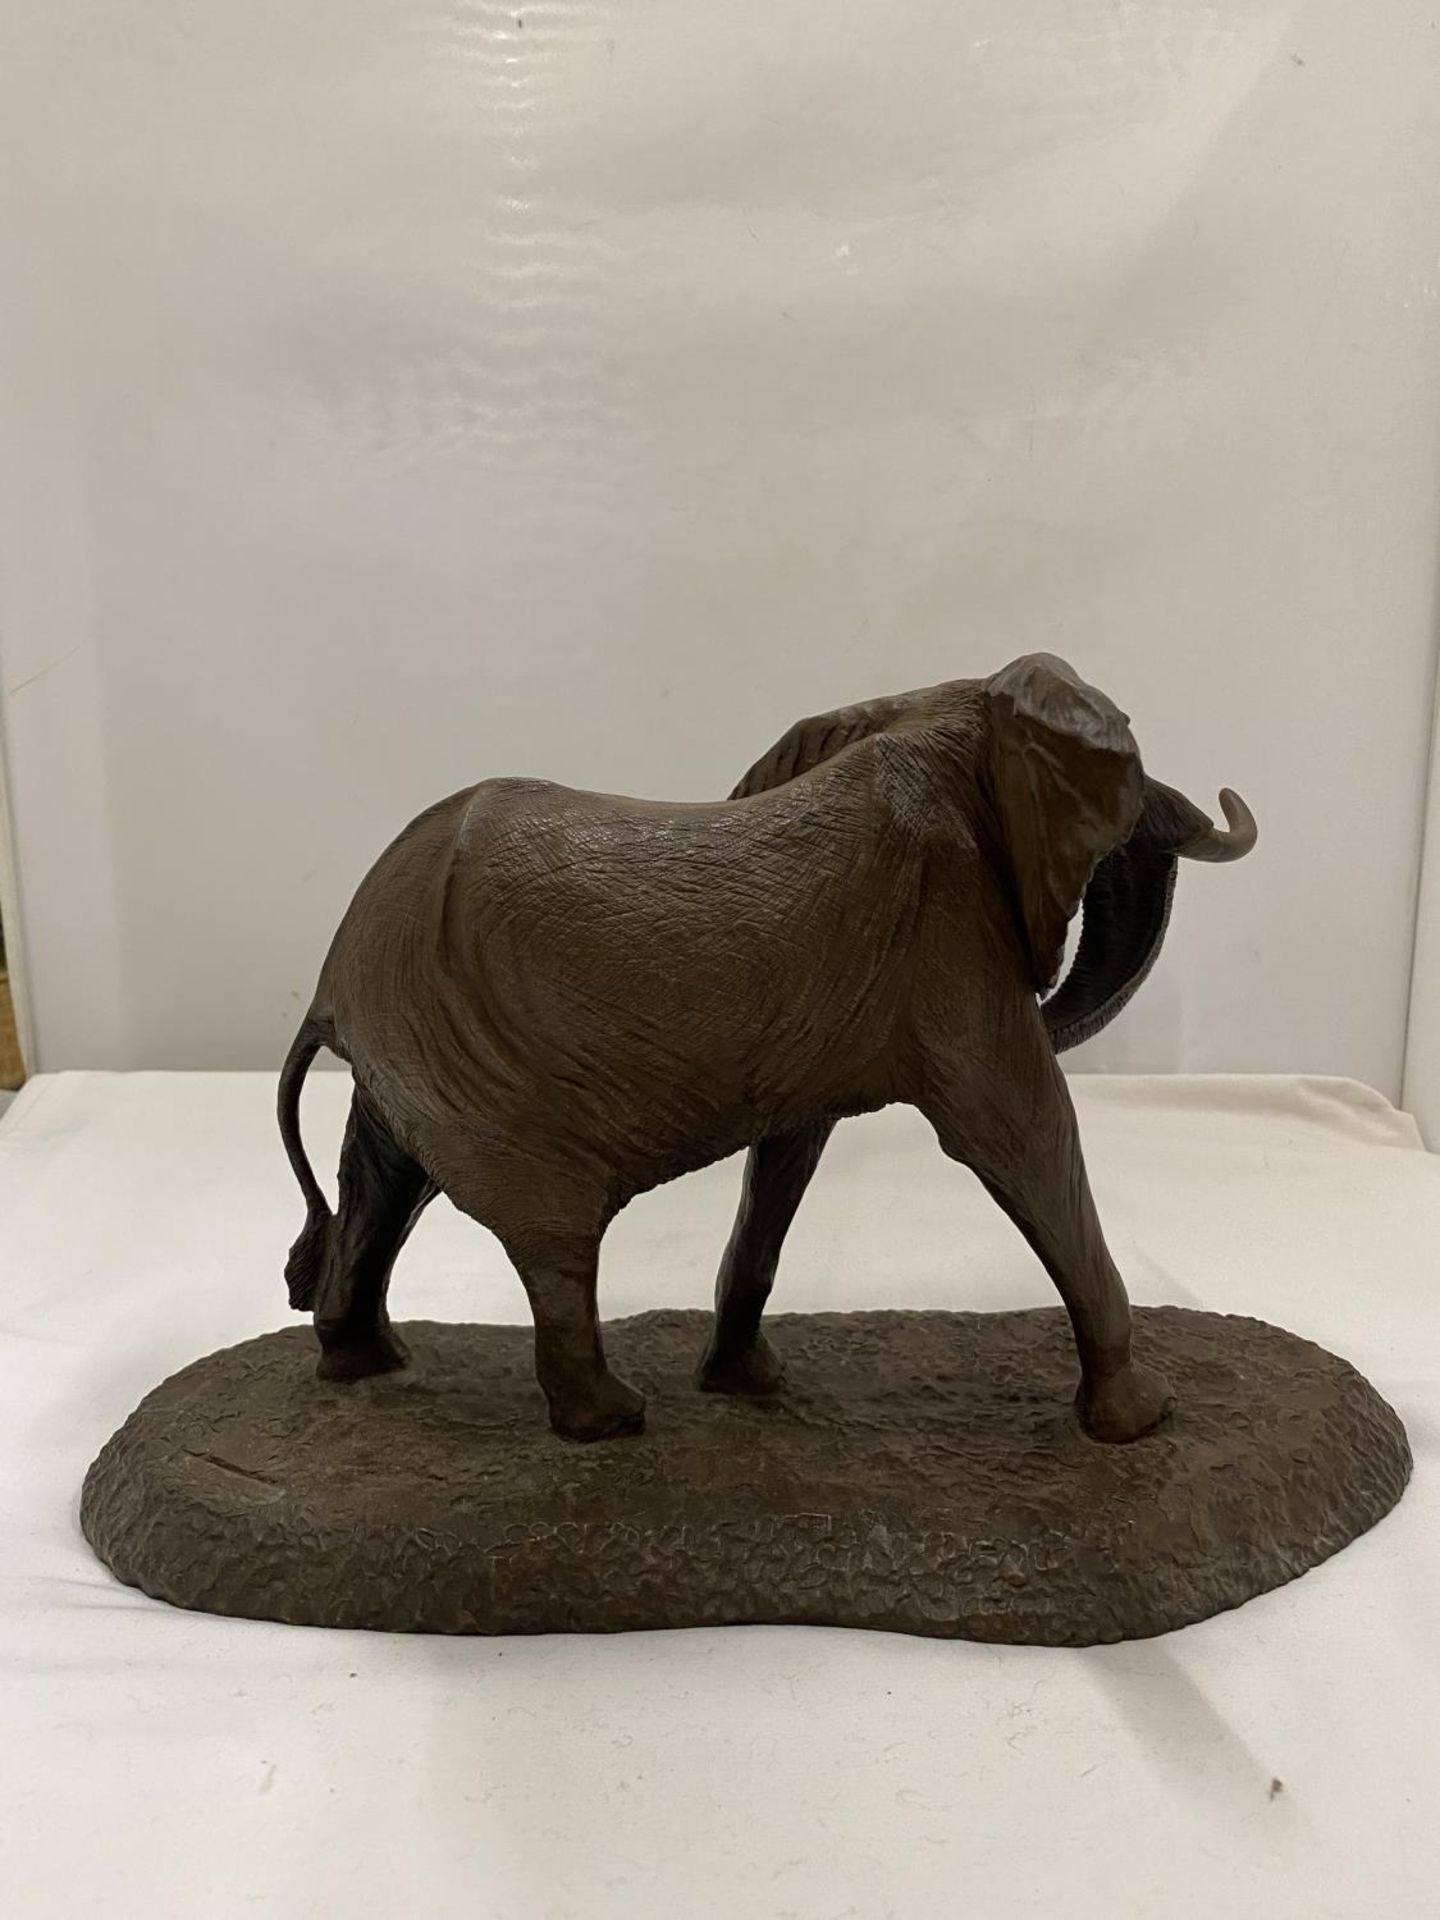 A ROBERT GLEN "GIANT OF THE AFRICAN PLAINS" ELEPHANT EAST AFRICAN WILDLIFE SOCIETY FIGURE (TUSK A/F) - Image 9 of 16